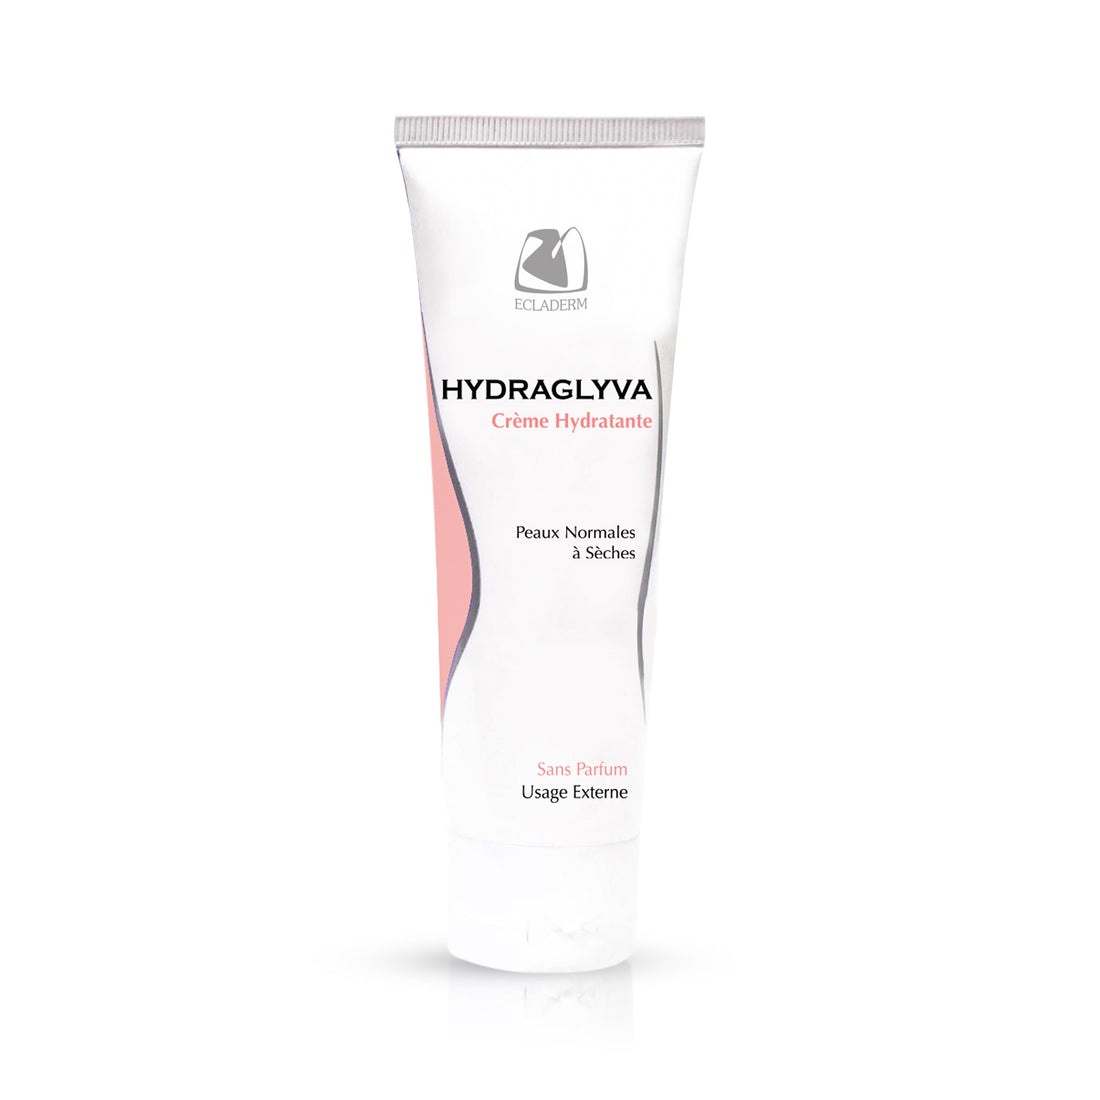 Hydraglyva Hydrating Facial Moisturizer for Normal and Dry Skin from Ecladerm